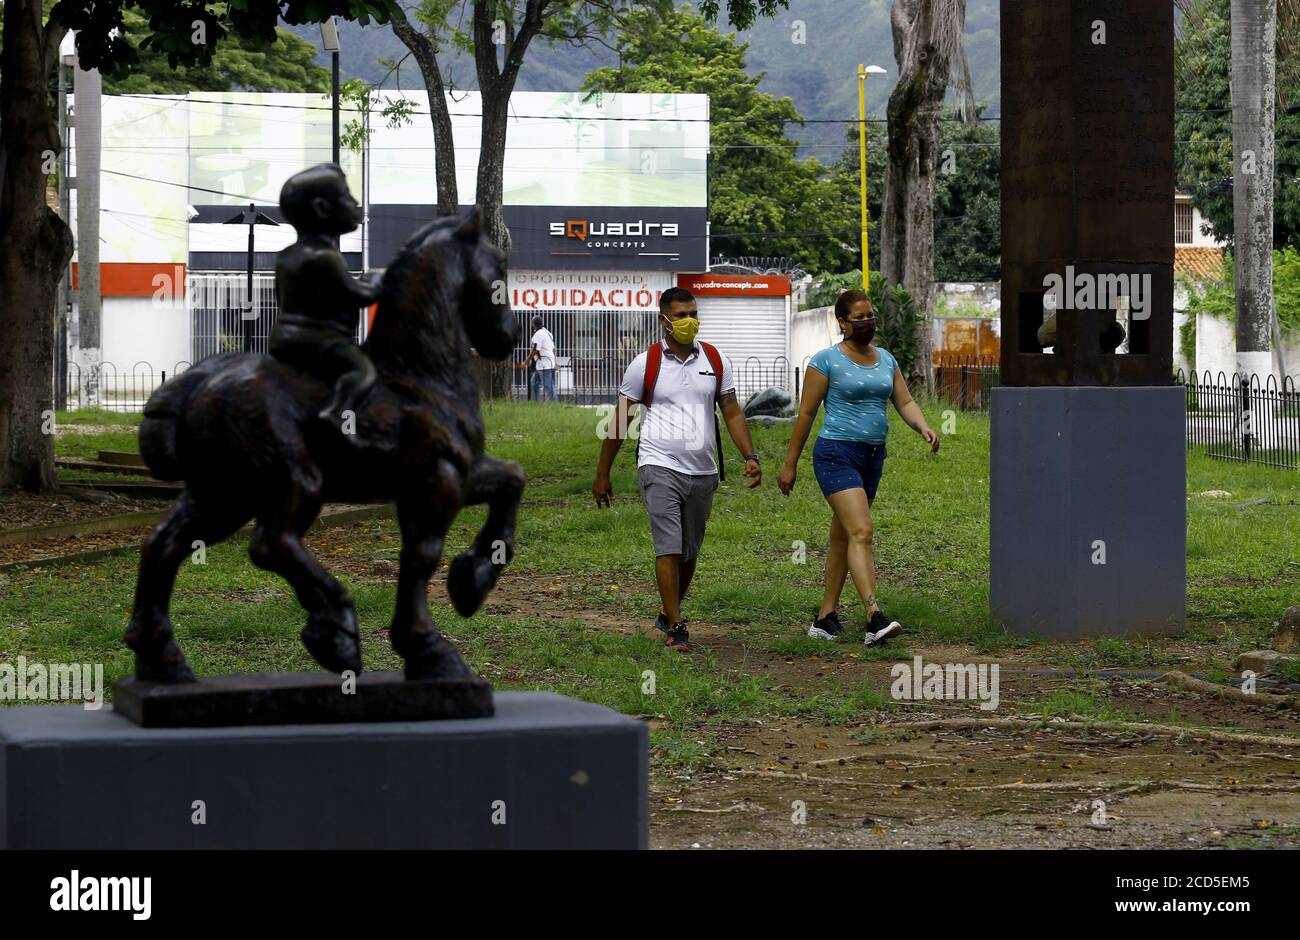 Valencia, Carabobo, Venezuela. 26th Aug, 2020. August 26, 2020. Residents recreate and make use of the face mask, during the relaxation of the quarantine, walking through the open air museum ''AndrÅ½s PÅ½rez Mujica'', better known as the square of the sculptures. Venezuela surpassed the forty thousand infected, officially announced by the government of Nicolas Maduro. Photo: Juan Carlos Hernandez. Credit: Juan Carlos Hernandez/ZUMA Wire/Alamy Live News Stock Photo